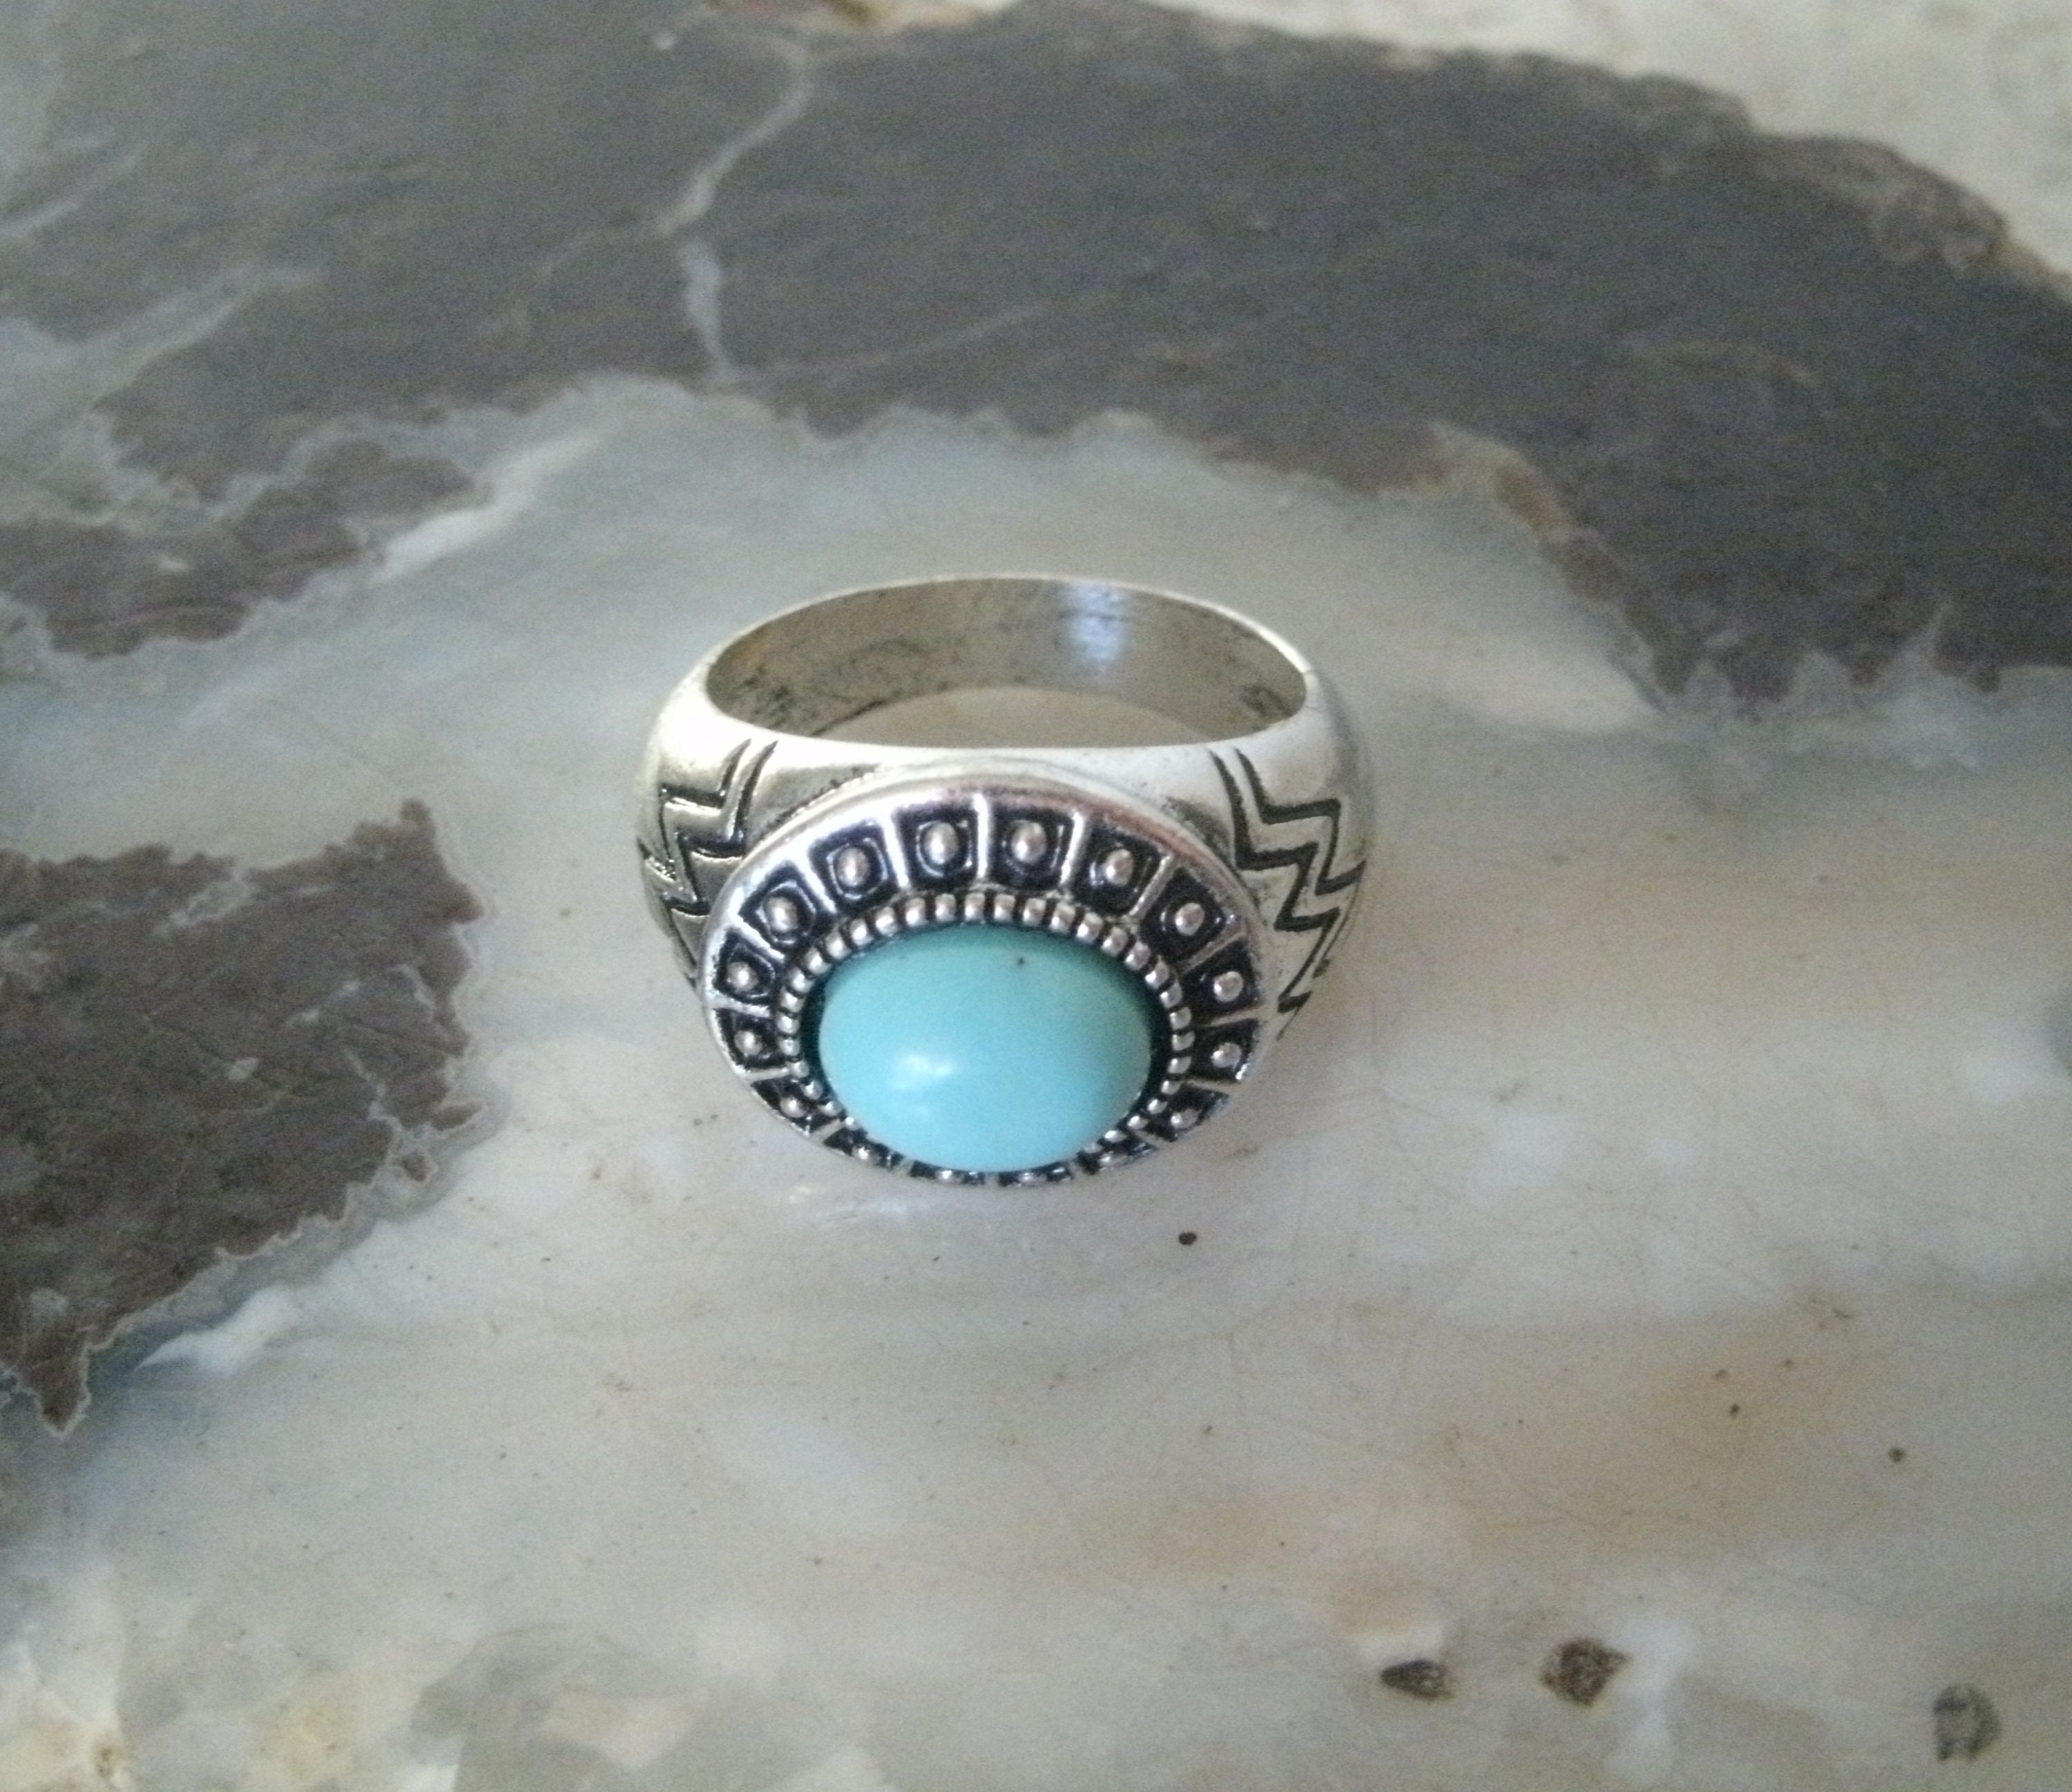 Boho Southwestern Spiritual, Hippie Stone Jewelry Wiccan Gemstone Turquoise Vision Ring Gypsy Sterling Silver Turquoise Ring